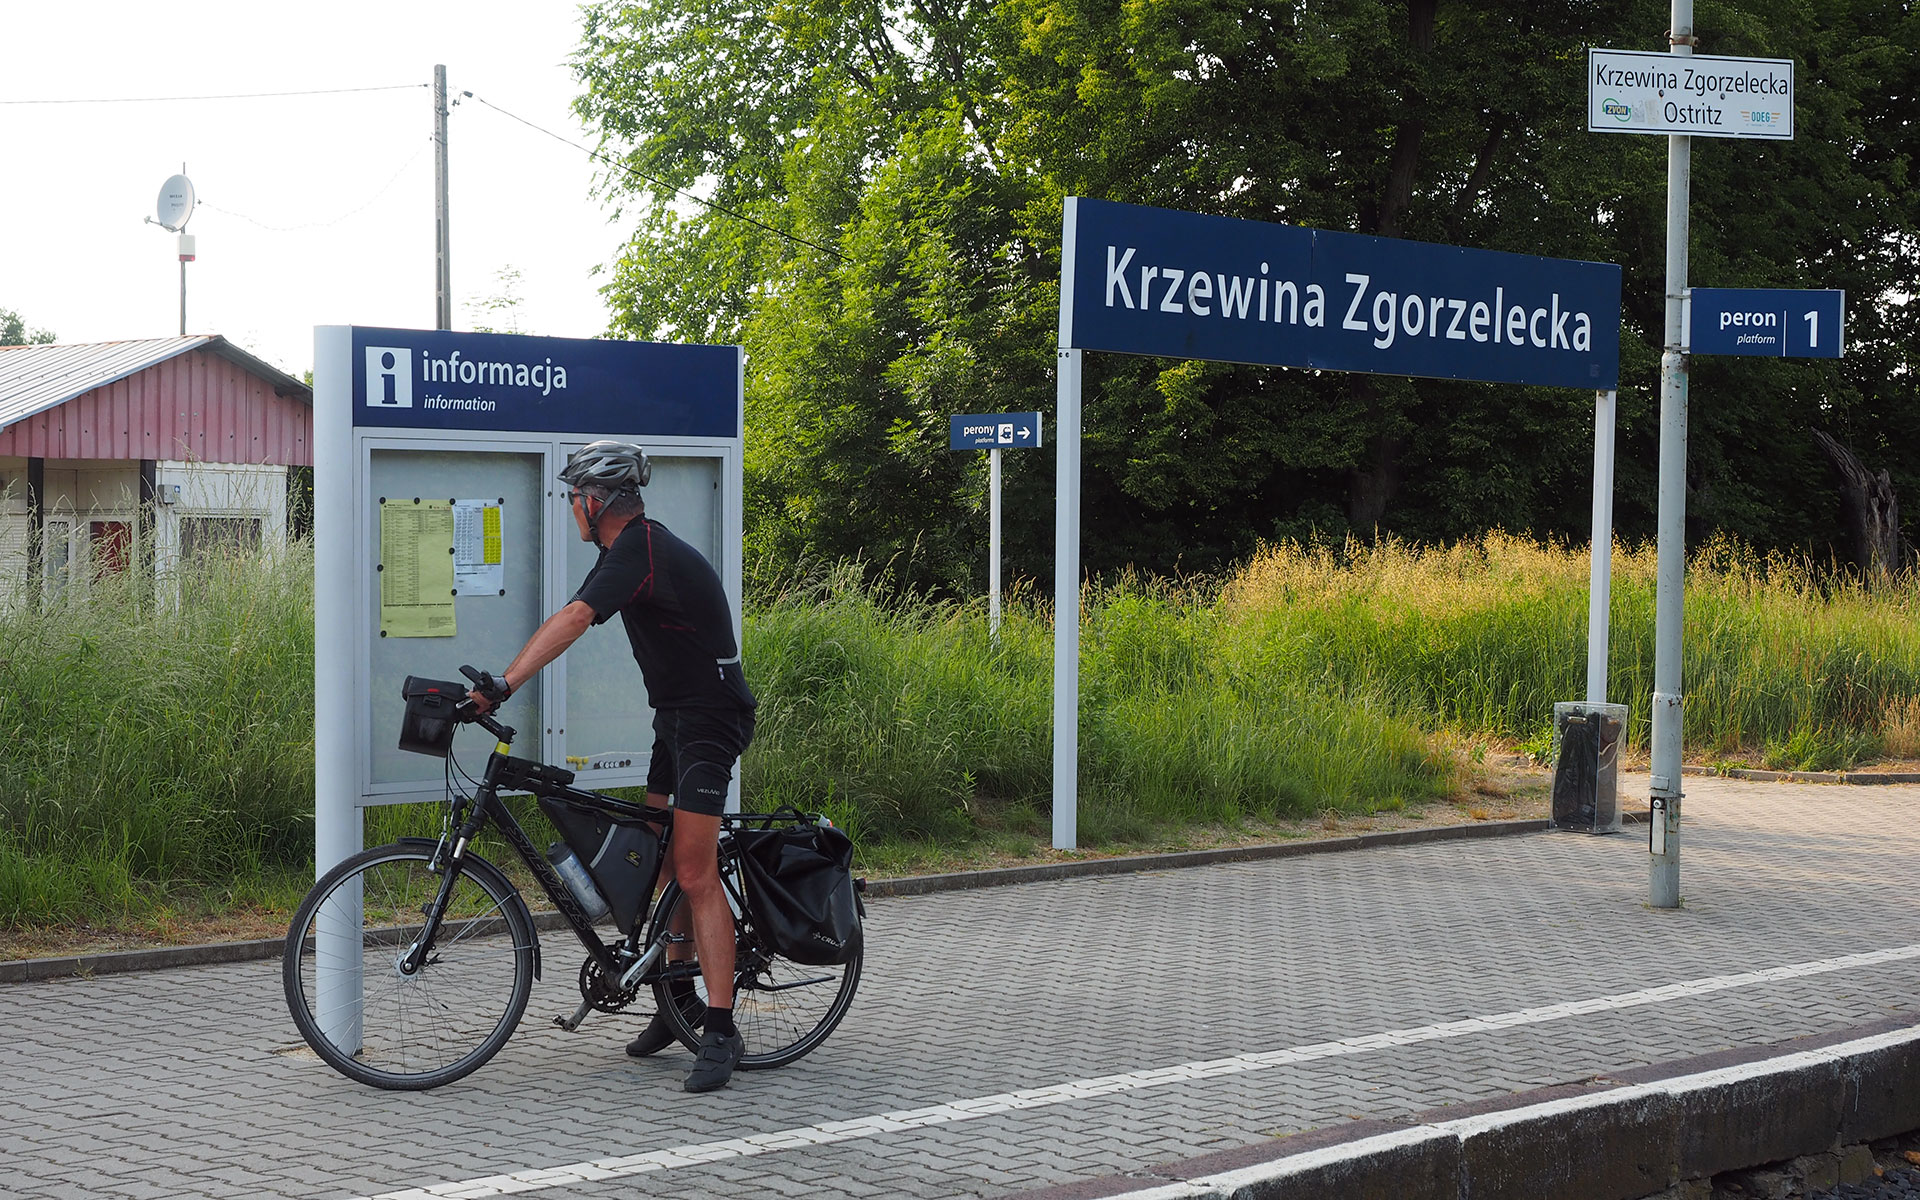 The Polish station at Krzewina Zgorzelecka is one of the places to which Germany’s 9-euro ticket is valid (photo © hidden europe).